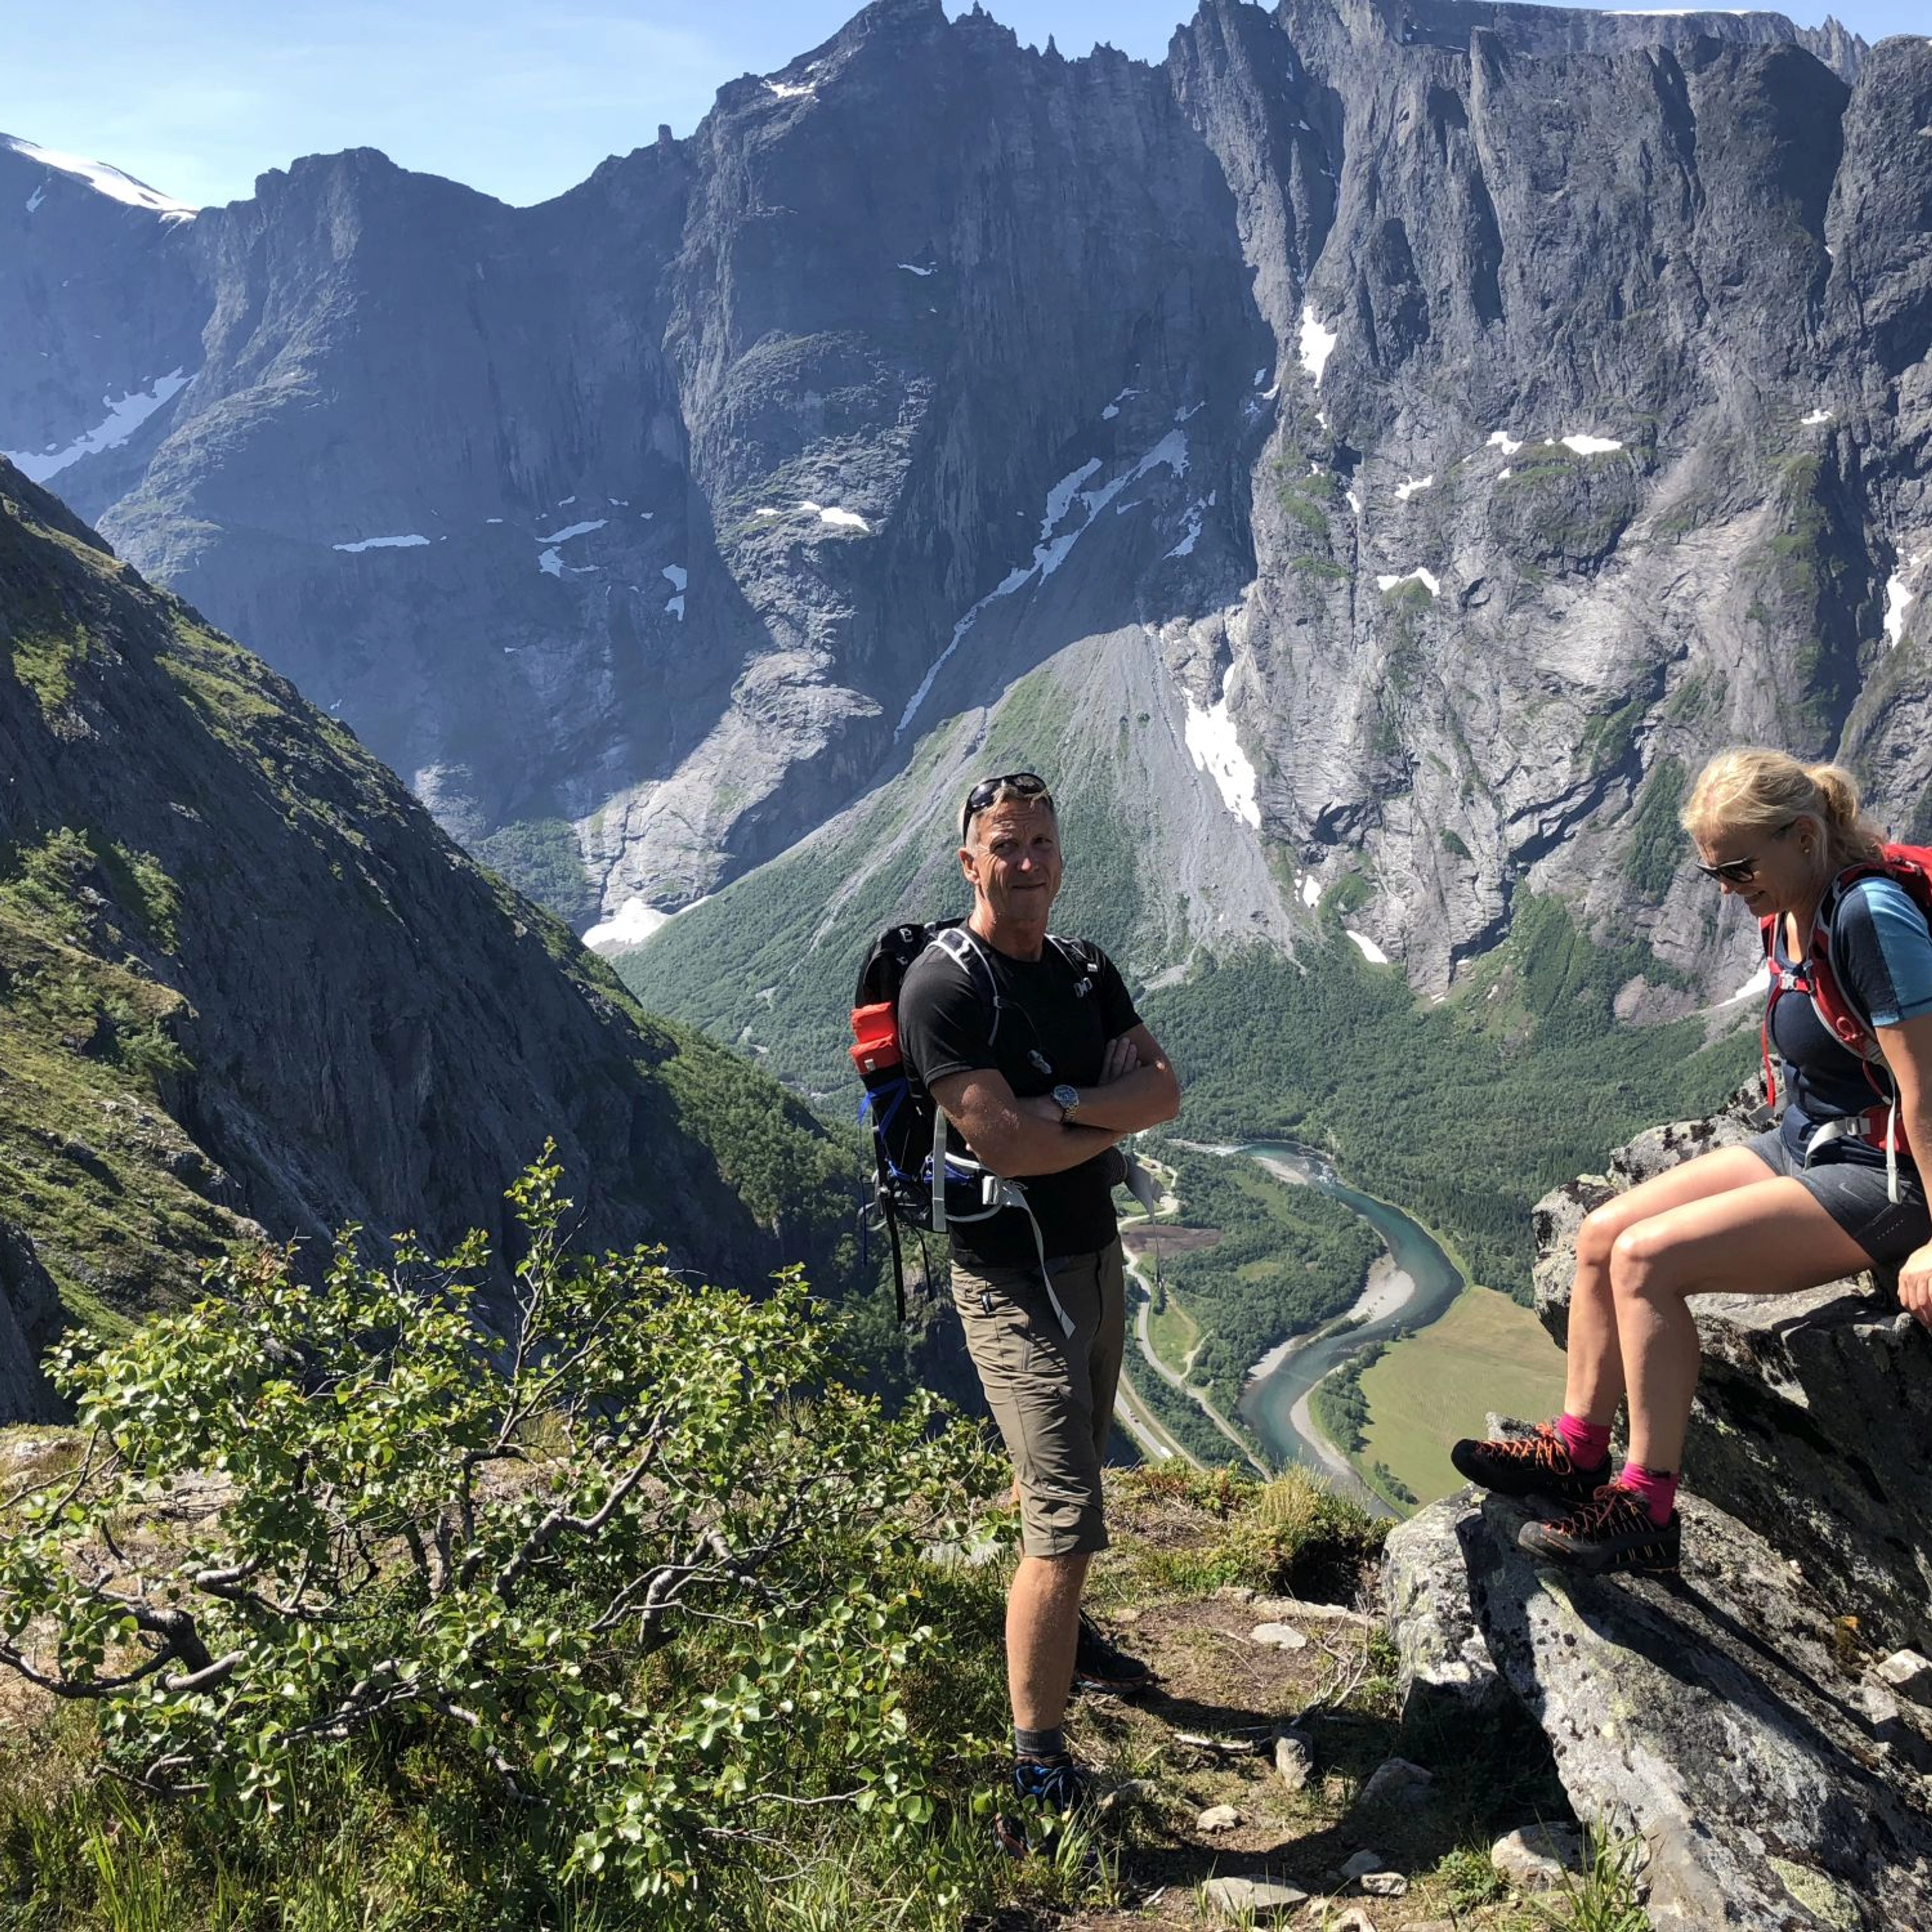 On top of the mountain  -hike to Trollveggen Viewpoint - things to do in Åndalsnes, Norway